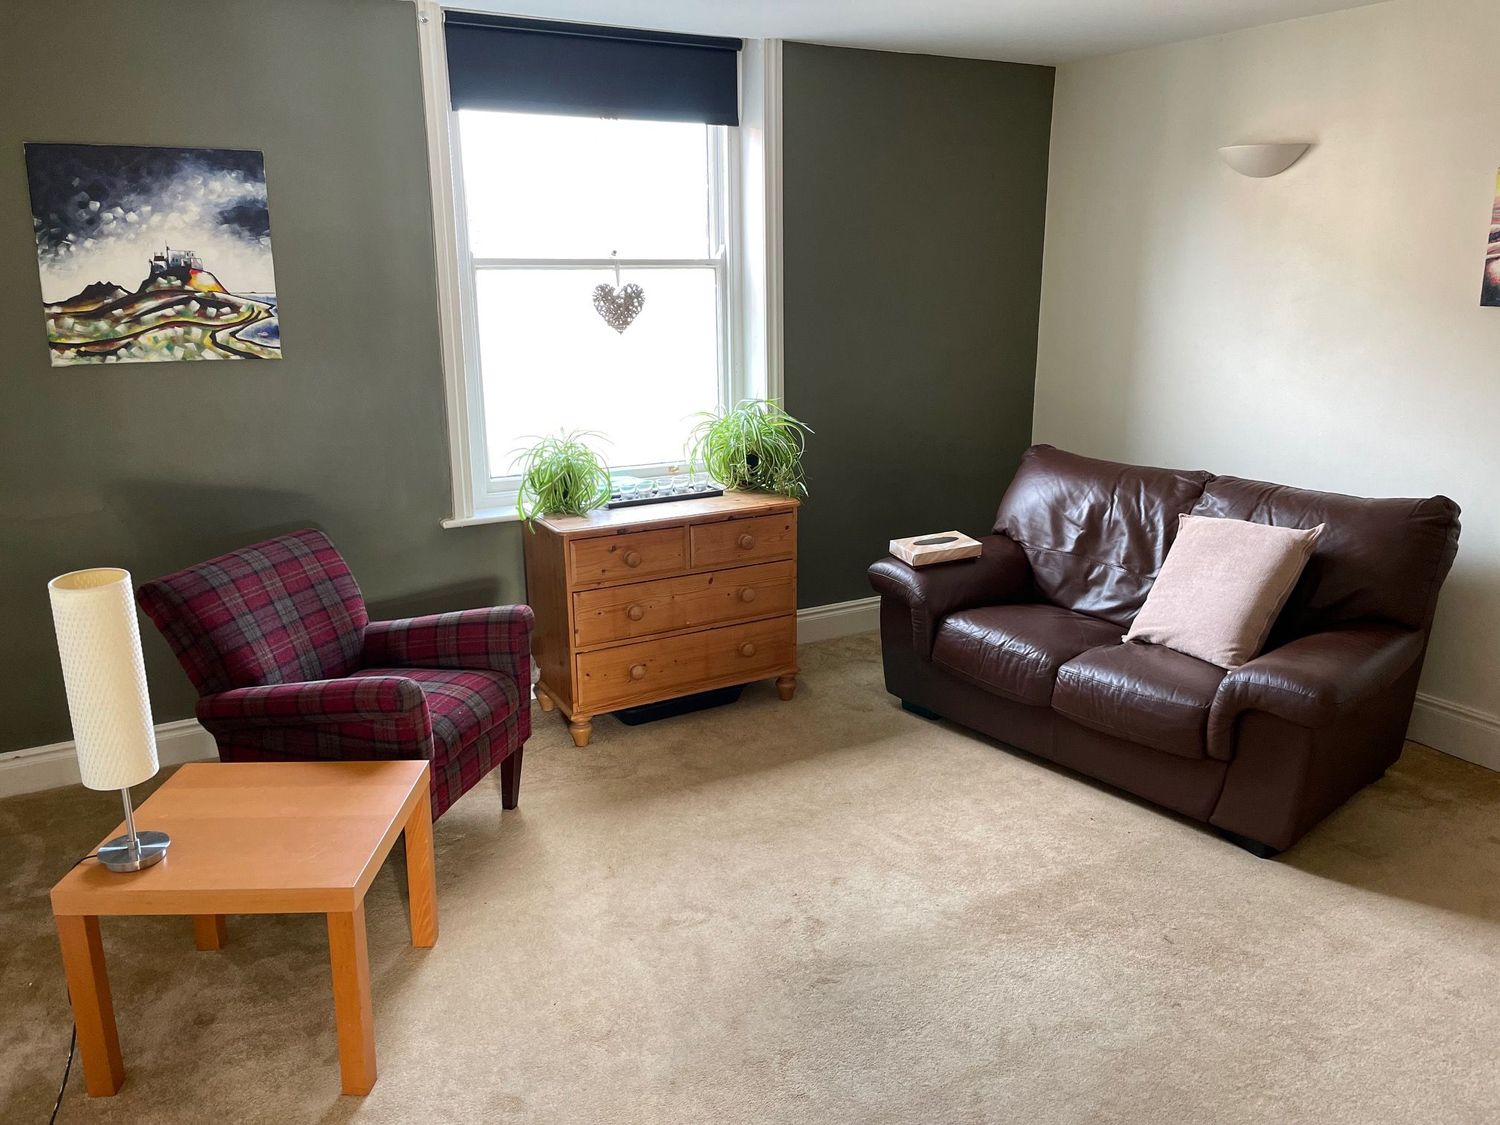 Gallery Photo of Counselling room at Watson House